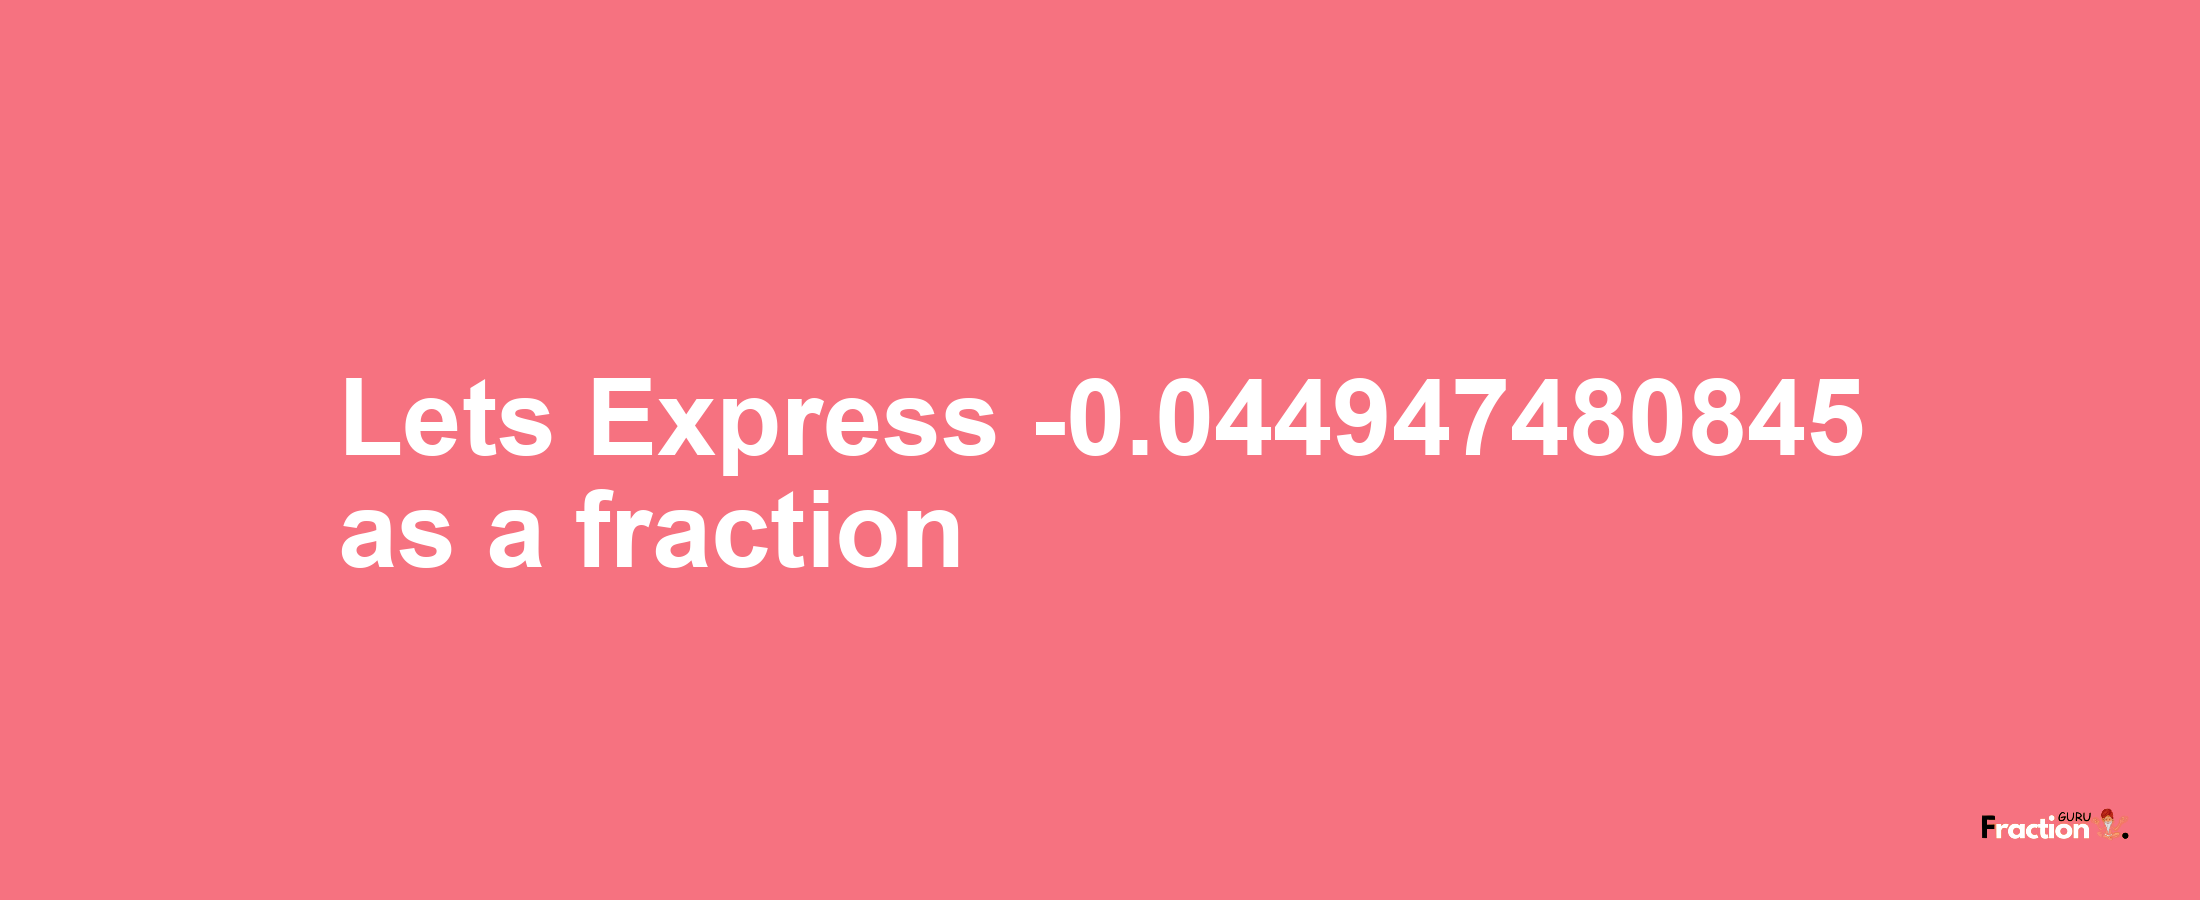 Lets Express -0.044947480845 as afraction